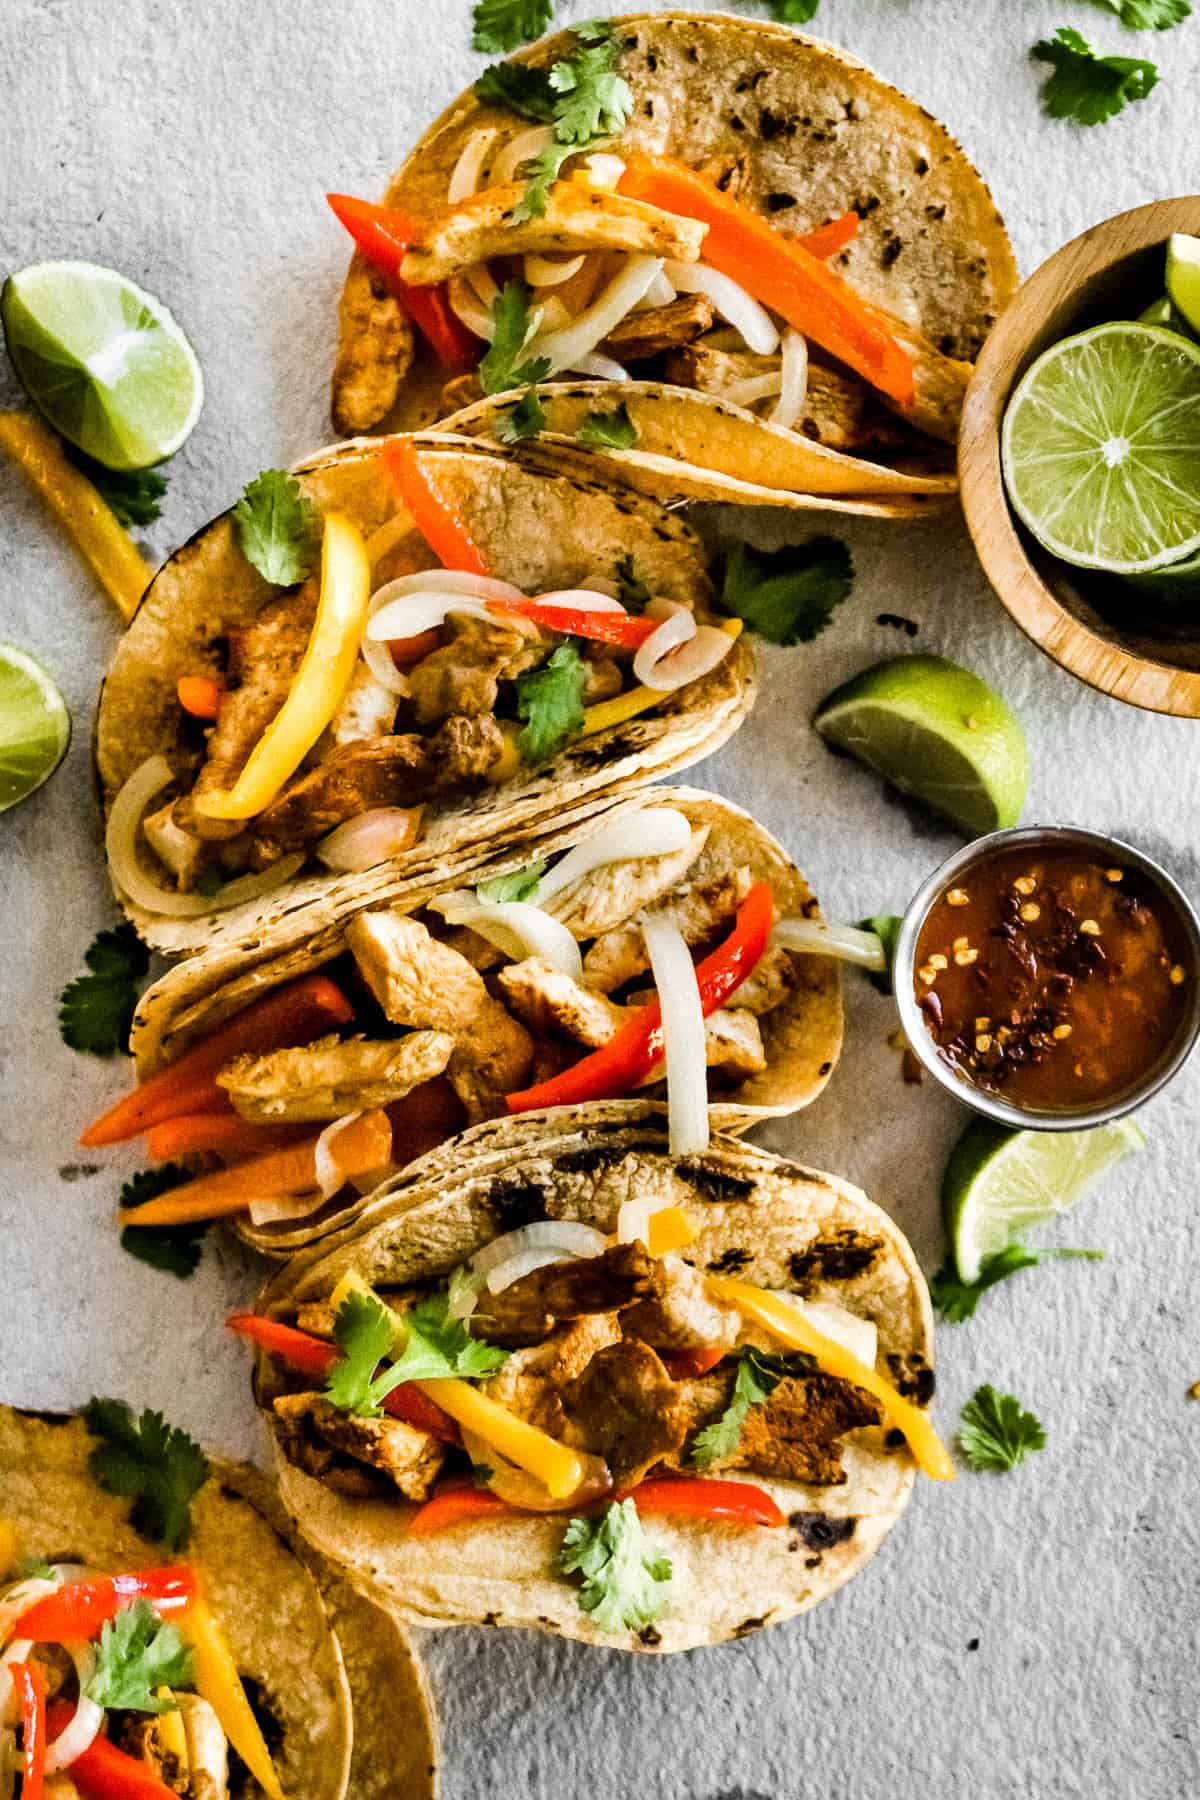 Corn tortillas filled with a mixture of grilled chicken, bell peppers, and onions. 